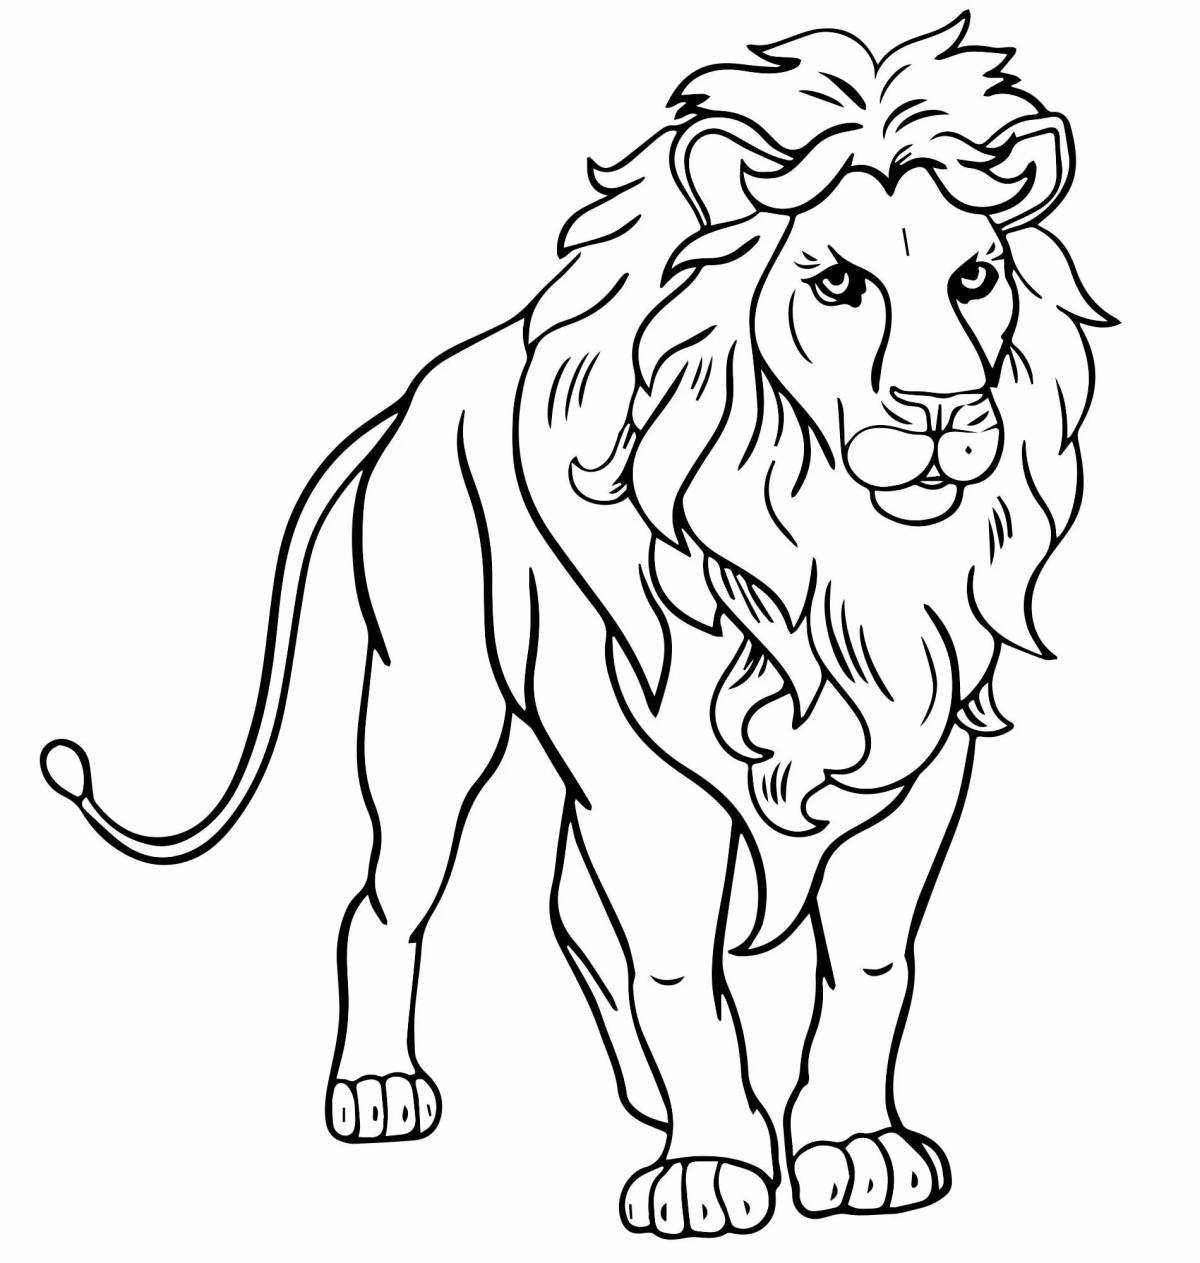 Coloring book noble lion for children 6-7 years old